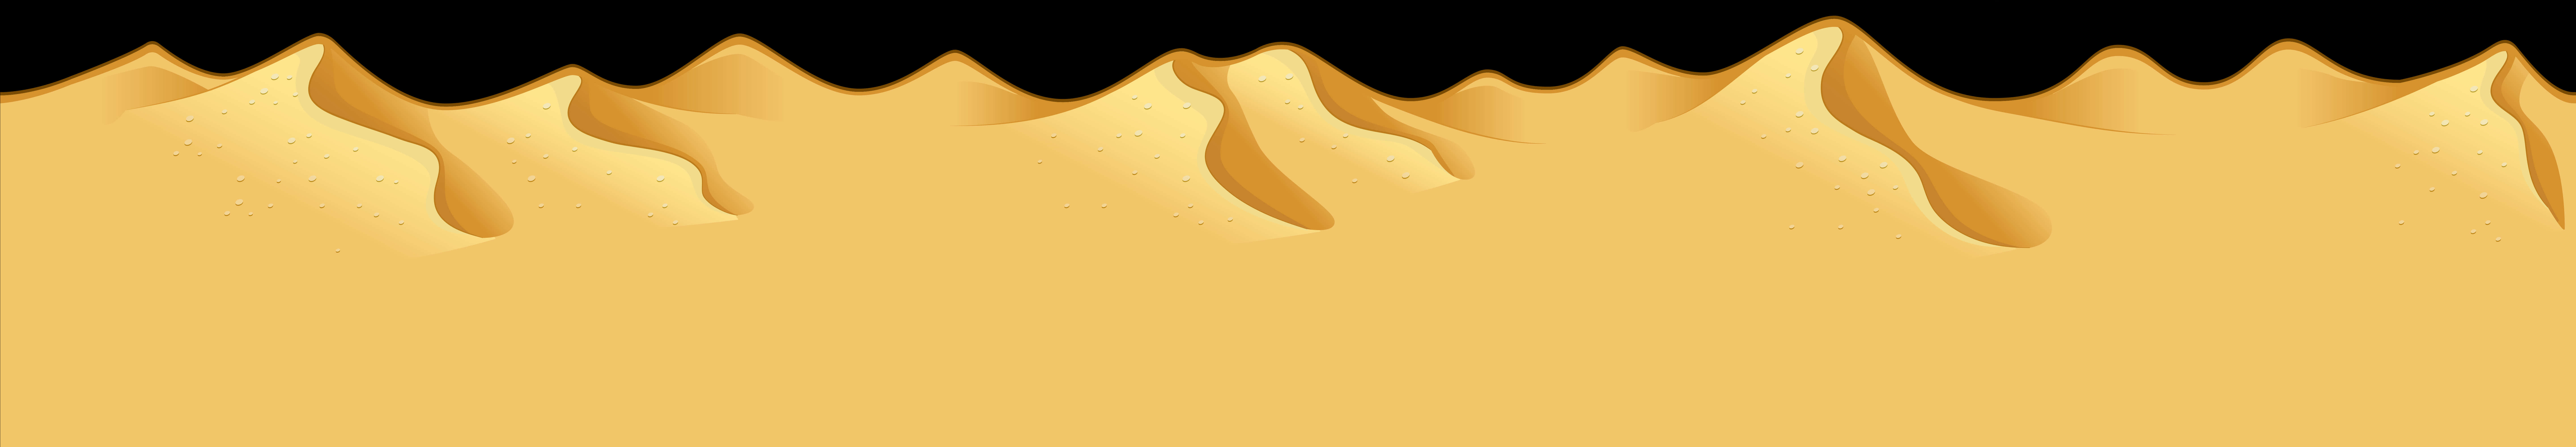 A Sand Dune With A Black Background